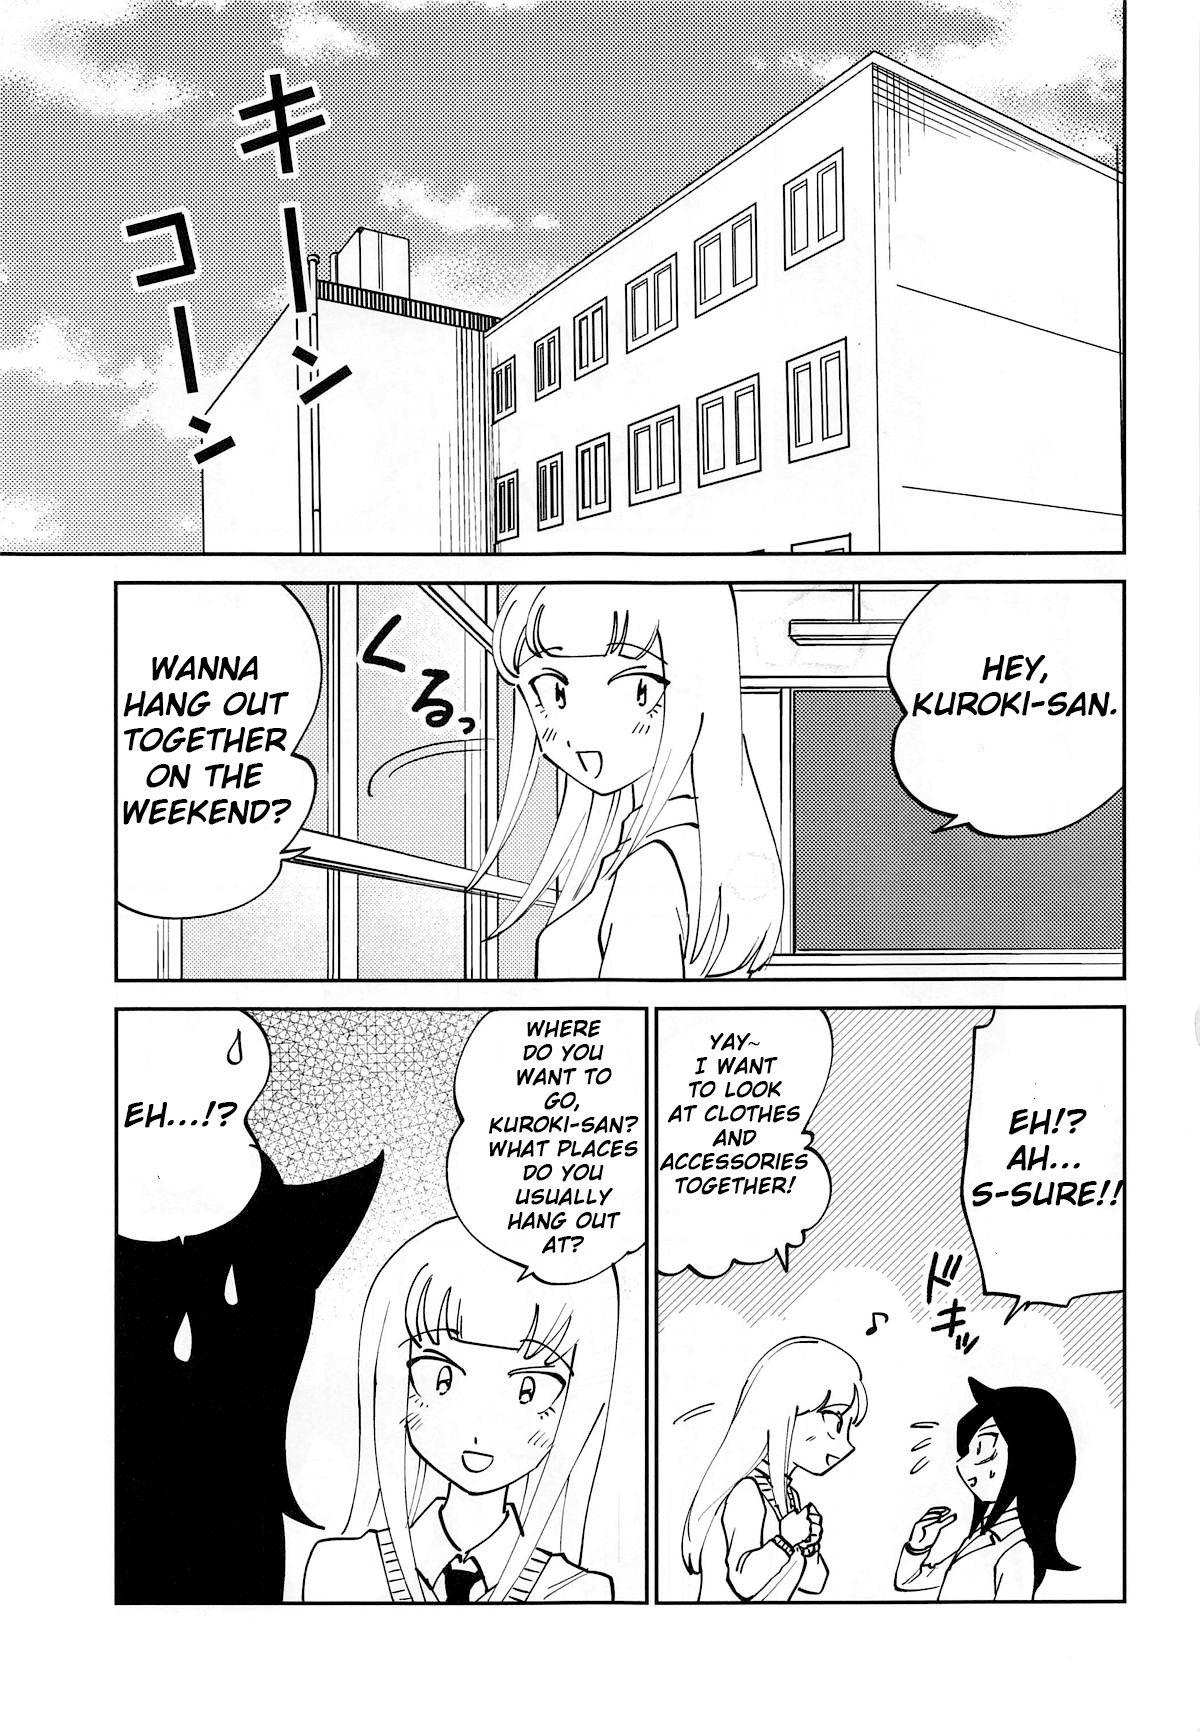 Foot Fetish Kuroki-san, Anone. - Its not my fault that im not popular Fuck Pussy - Page 2